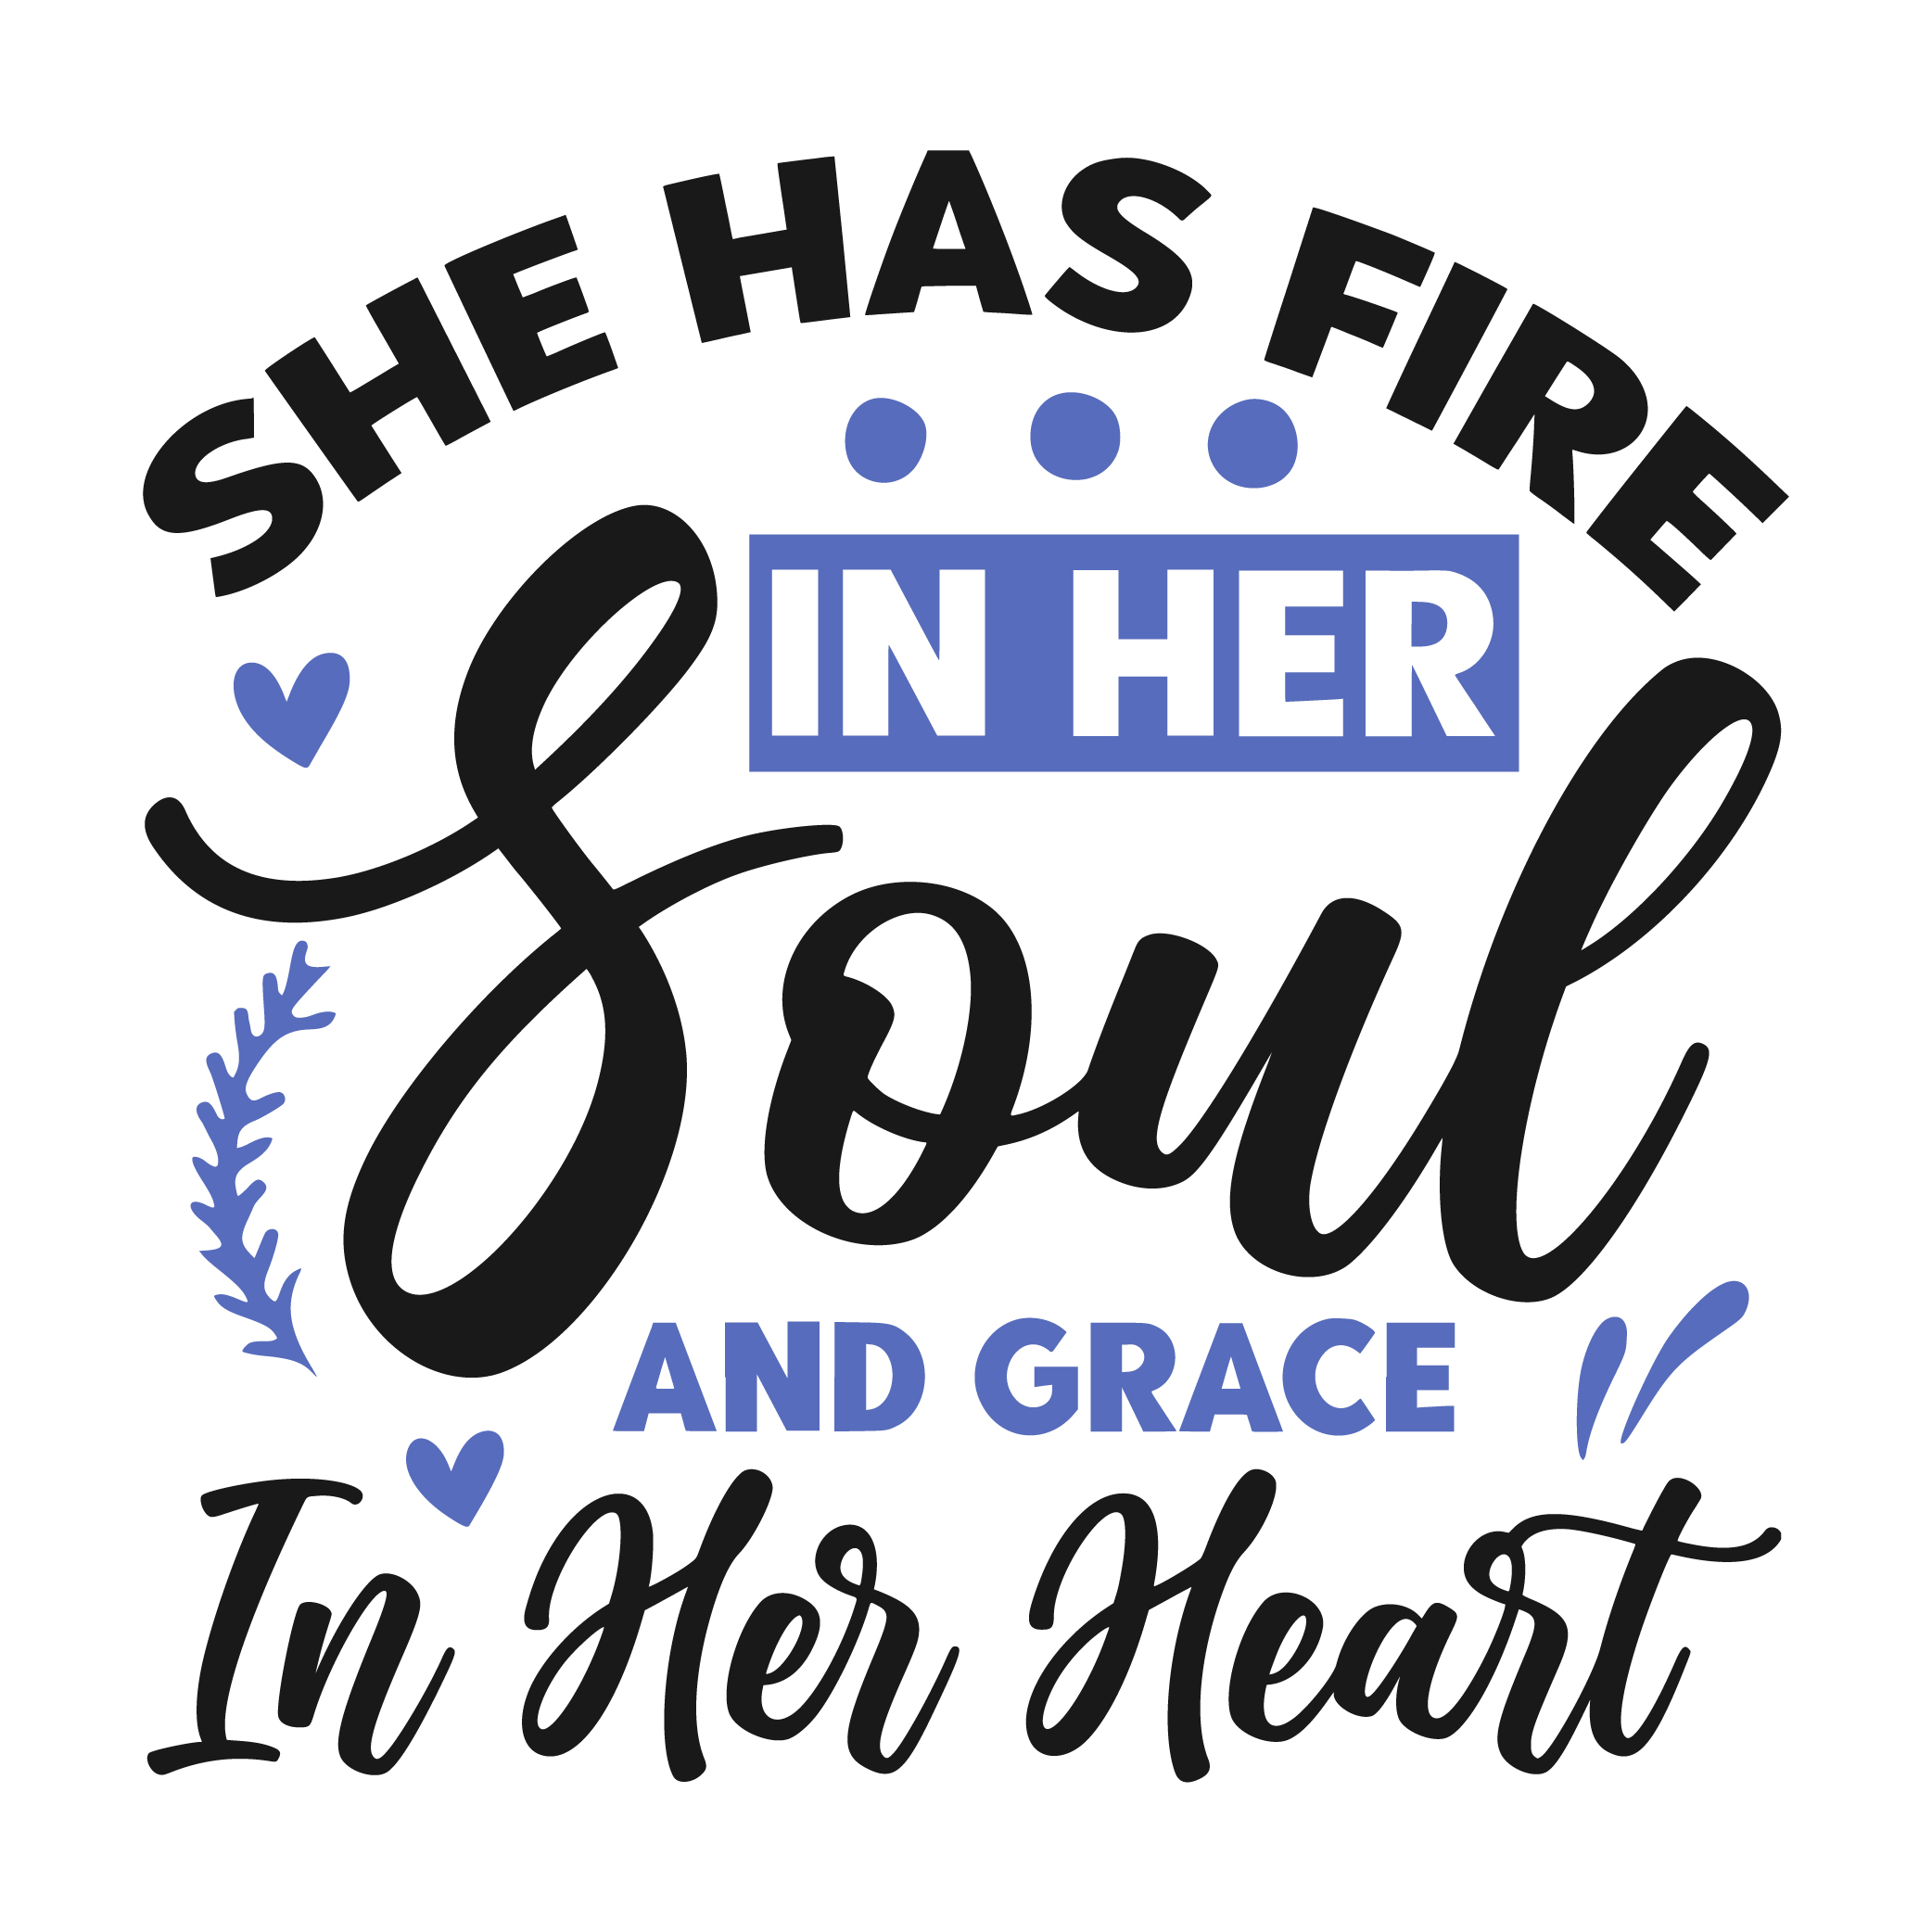 she has fire in her soul and grace in her heart woman SVG Boss Lady  Black Lives Matter  Lady Woman Diva Tshirt Cut File Cricut Silhouette Women Empowerment svg Feminism svg Girl Power 